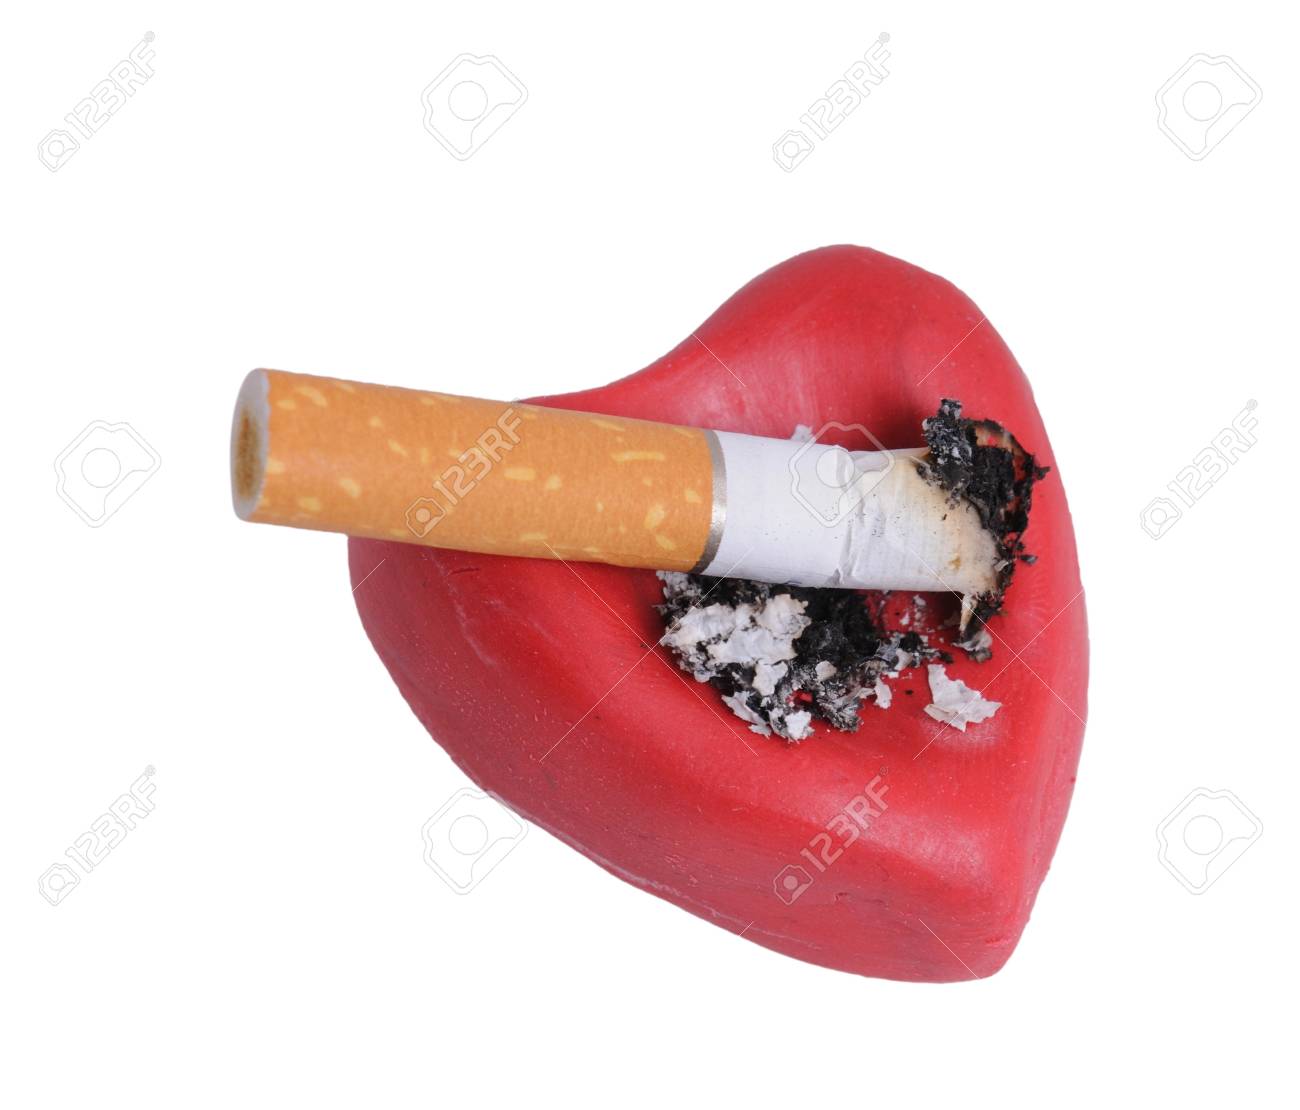 Cigaret Stub In Heart Isolated On A White Background Stock Photo